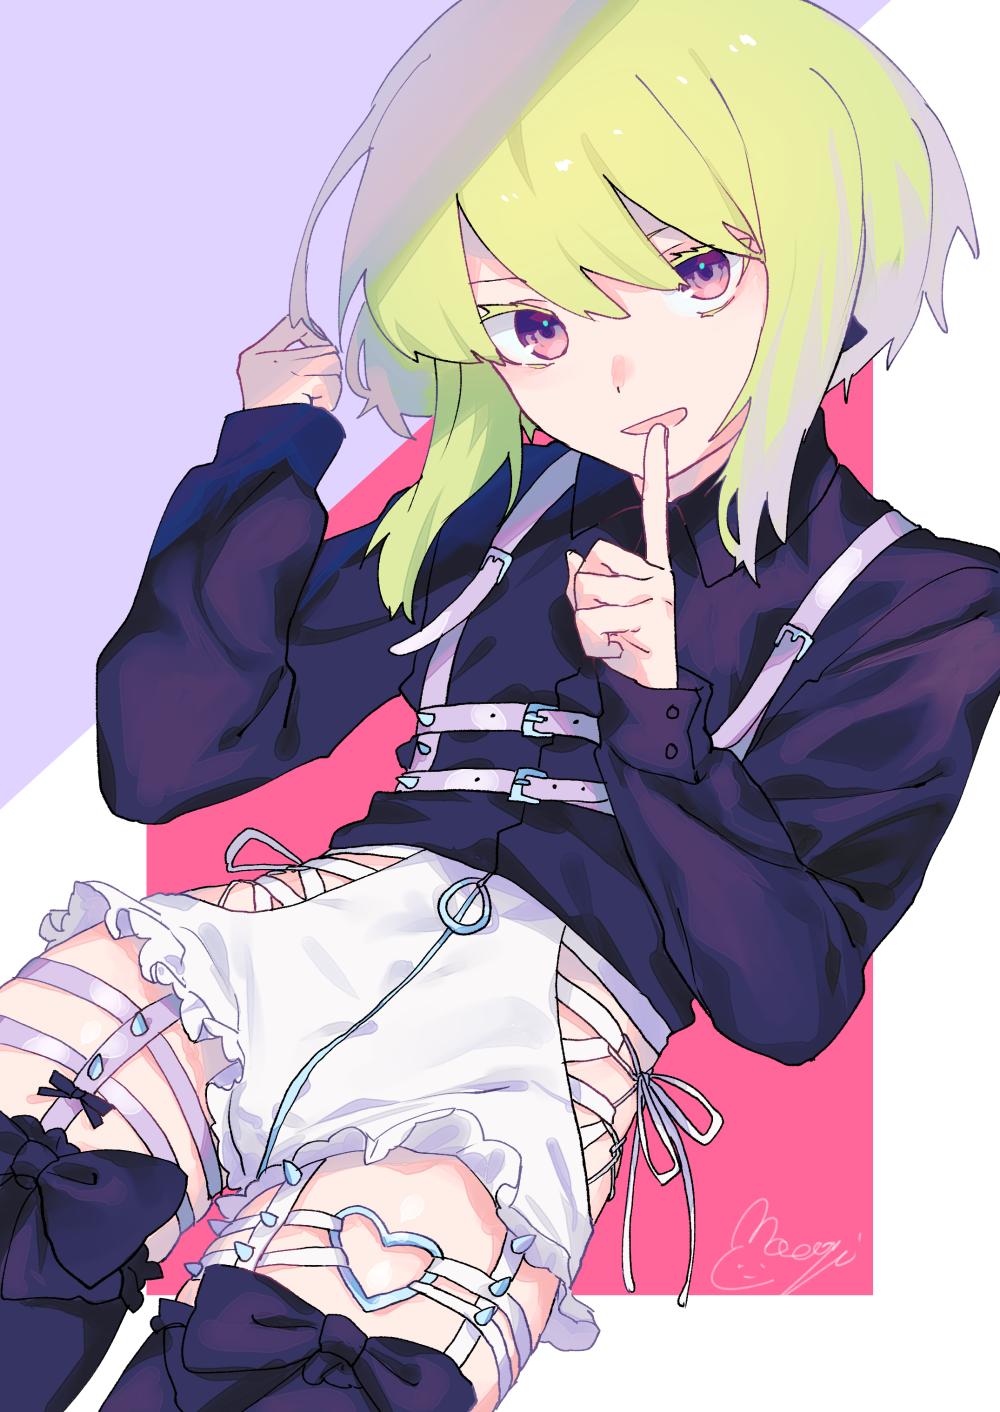 1boy belt blonde_hair blush earrings gloves green_hair hair_ornament half_gloves heart highres jacket jewelry lio_fotia looking_at_viewer male_focus moegi0926 open_mouth otoko_no_ko promare short_hair shorts simple_background smile solo thigh-highs violet_eyes